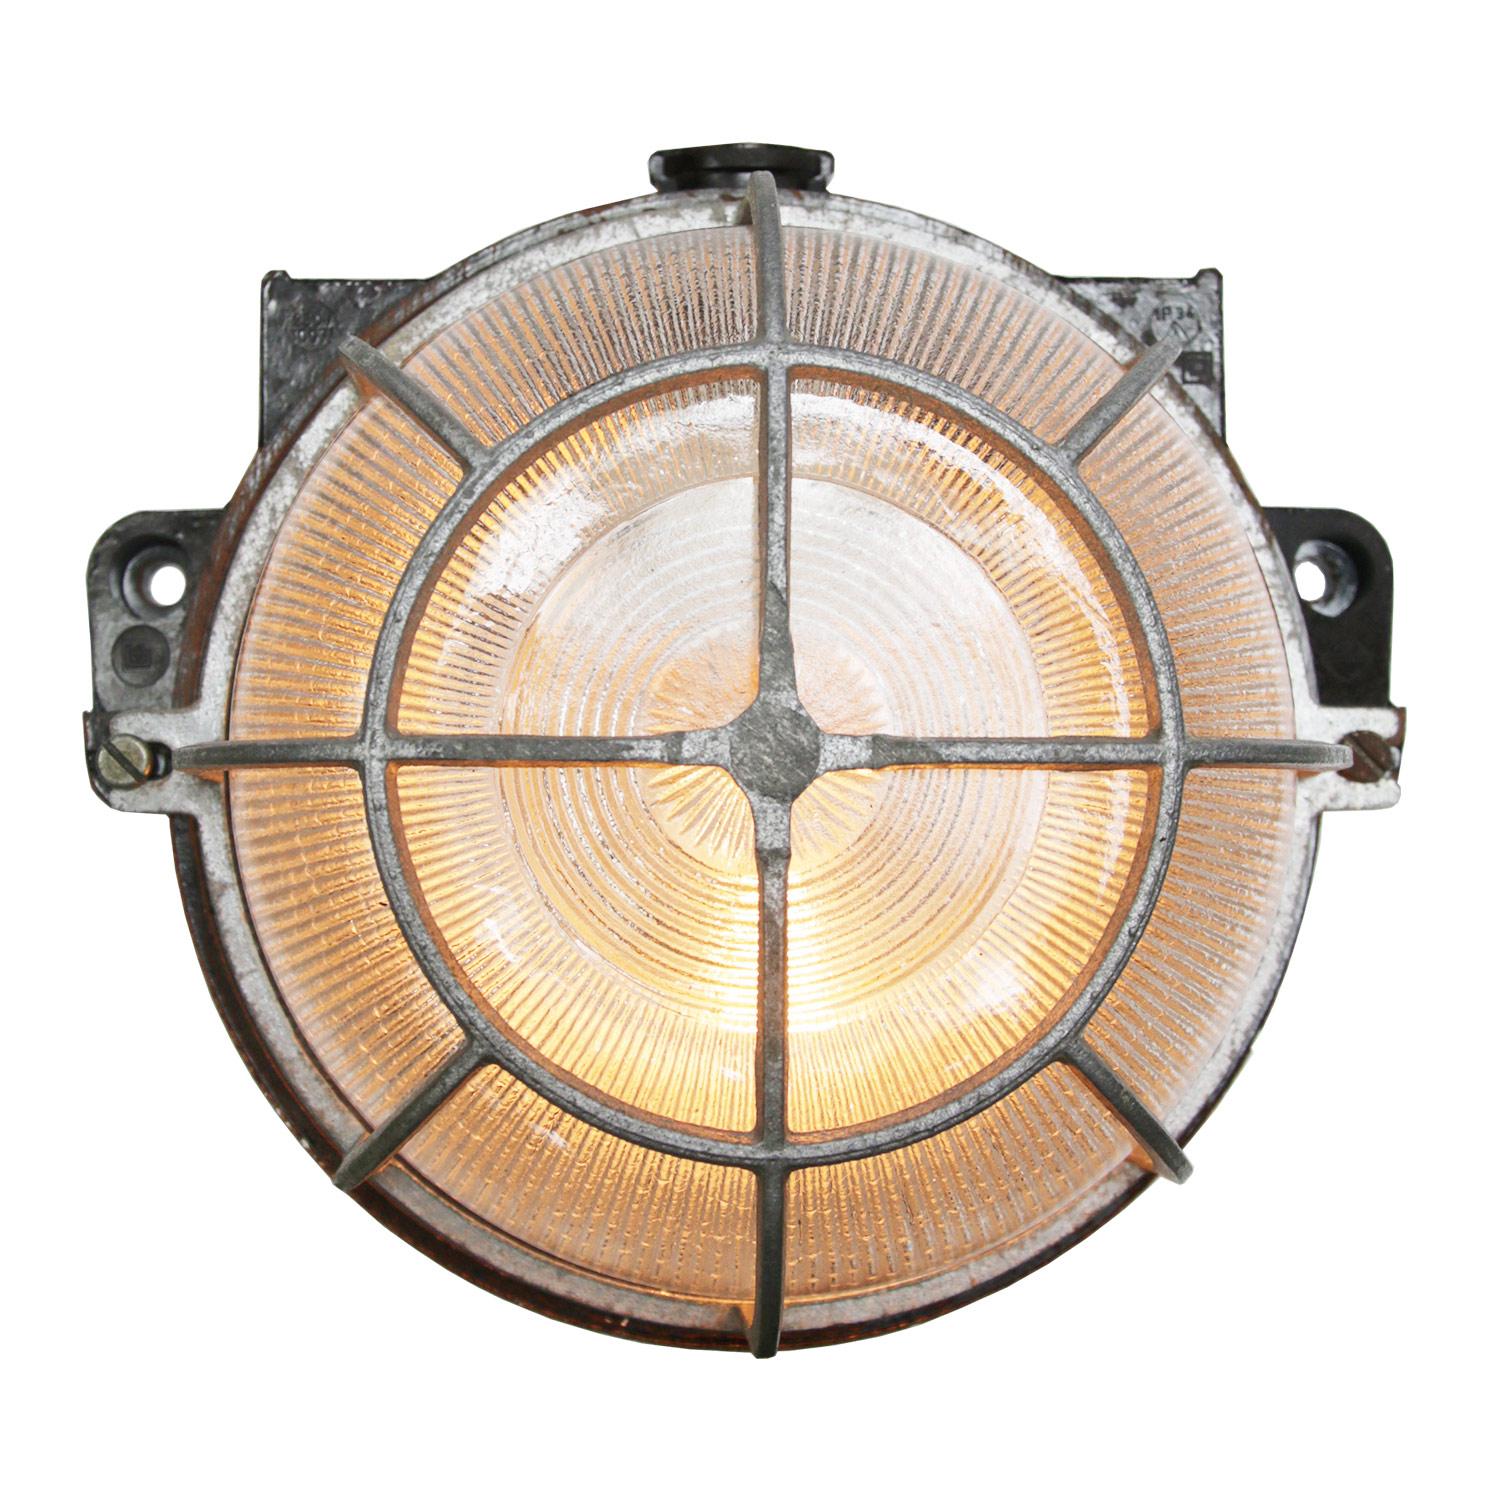 Industrial scones and ceiling flush mount lights. Bakelite base. Holophane striped glass.
Aluminum frame.

Weight 1.0 kg / 2.2 lb

Priced per individual item. All lamps have been made suitable by international standards for incandescent light